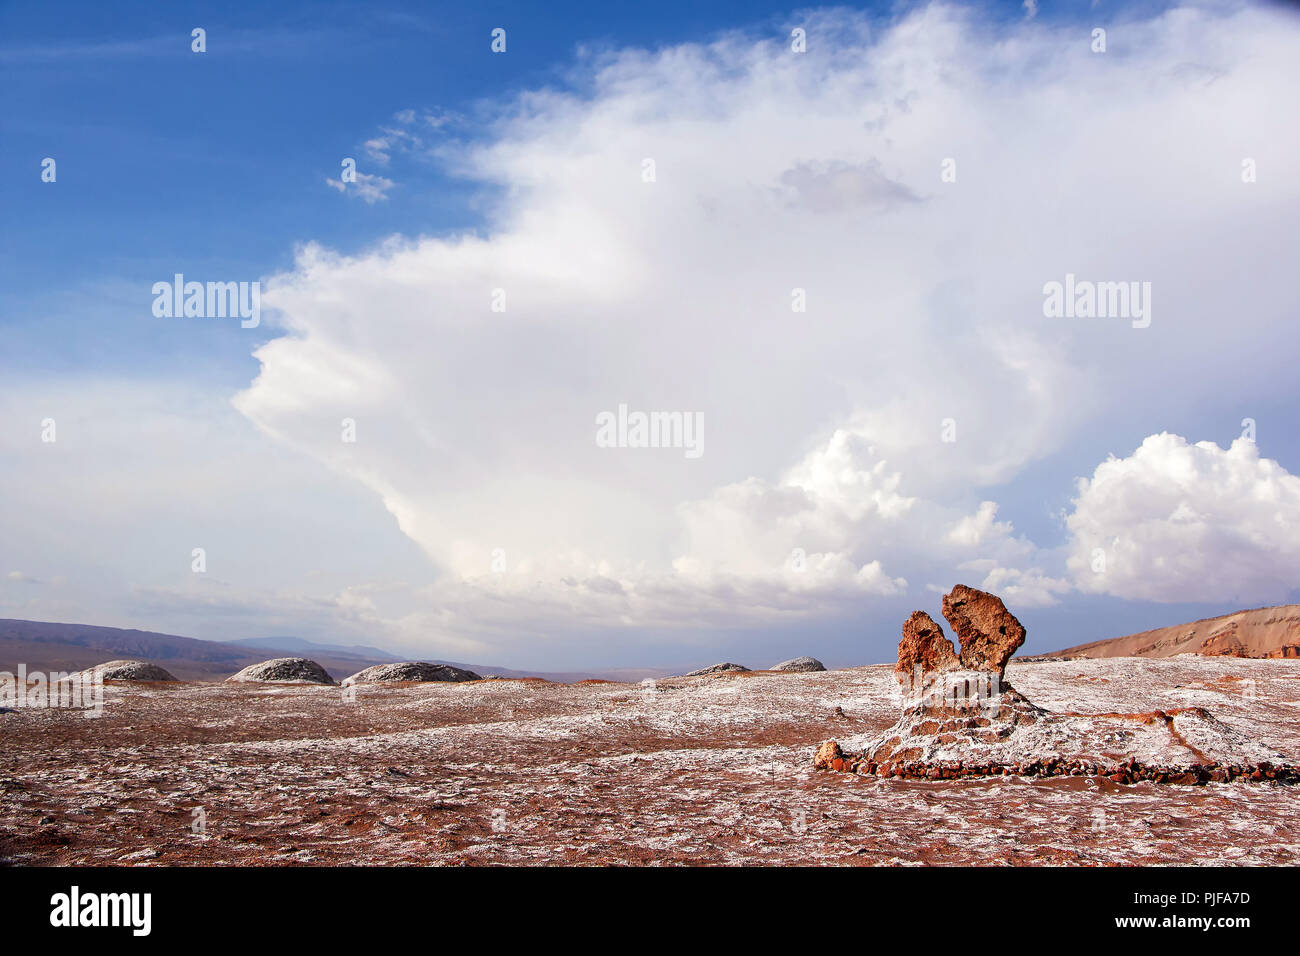 The rock of red sandstone on the background of amazing  cloudy sky  in  the Moon Valley, Atacama desert, Chile Stock Photo